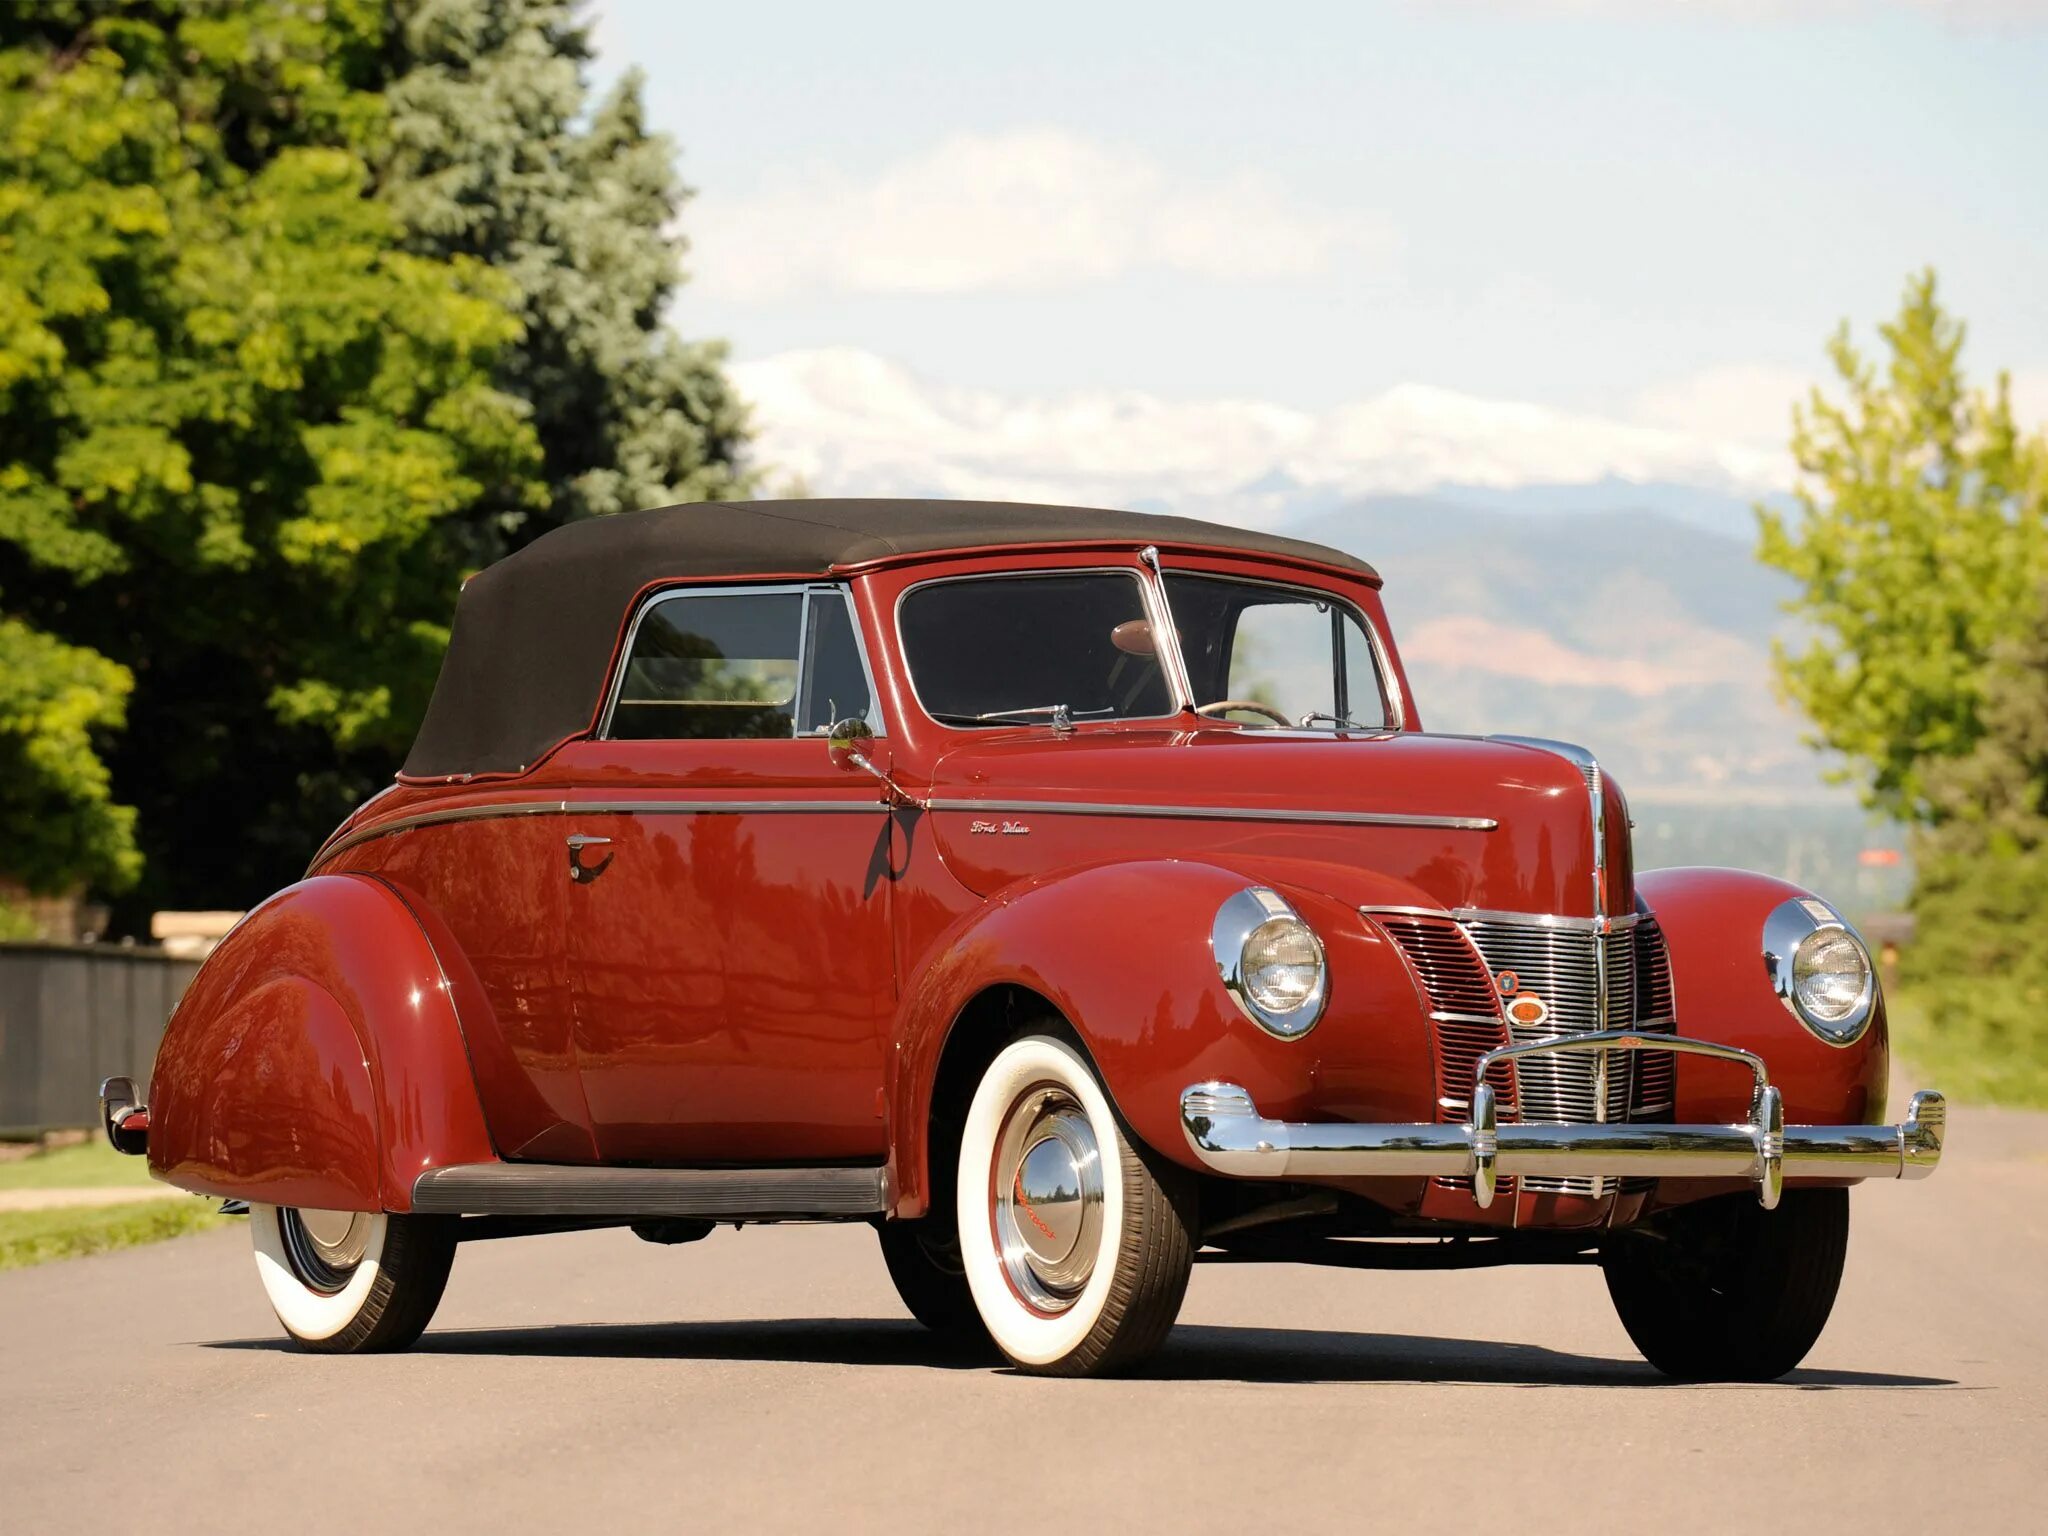 Best old cars. Ford Deluxe 1940. Ford v8 1940. Ford v8 Deluxe Coupe. Форд v8 1940 купе.